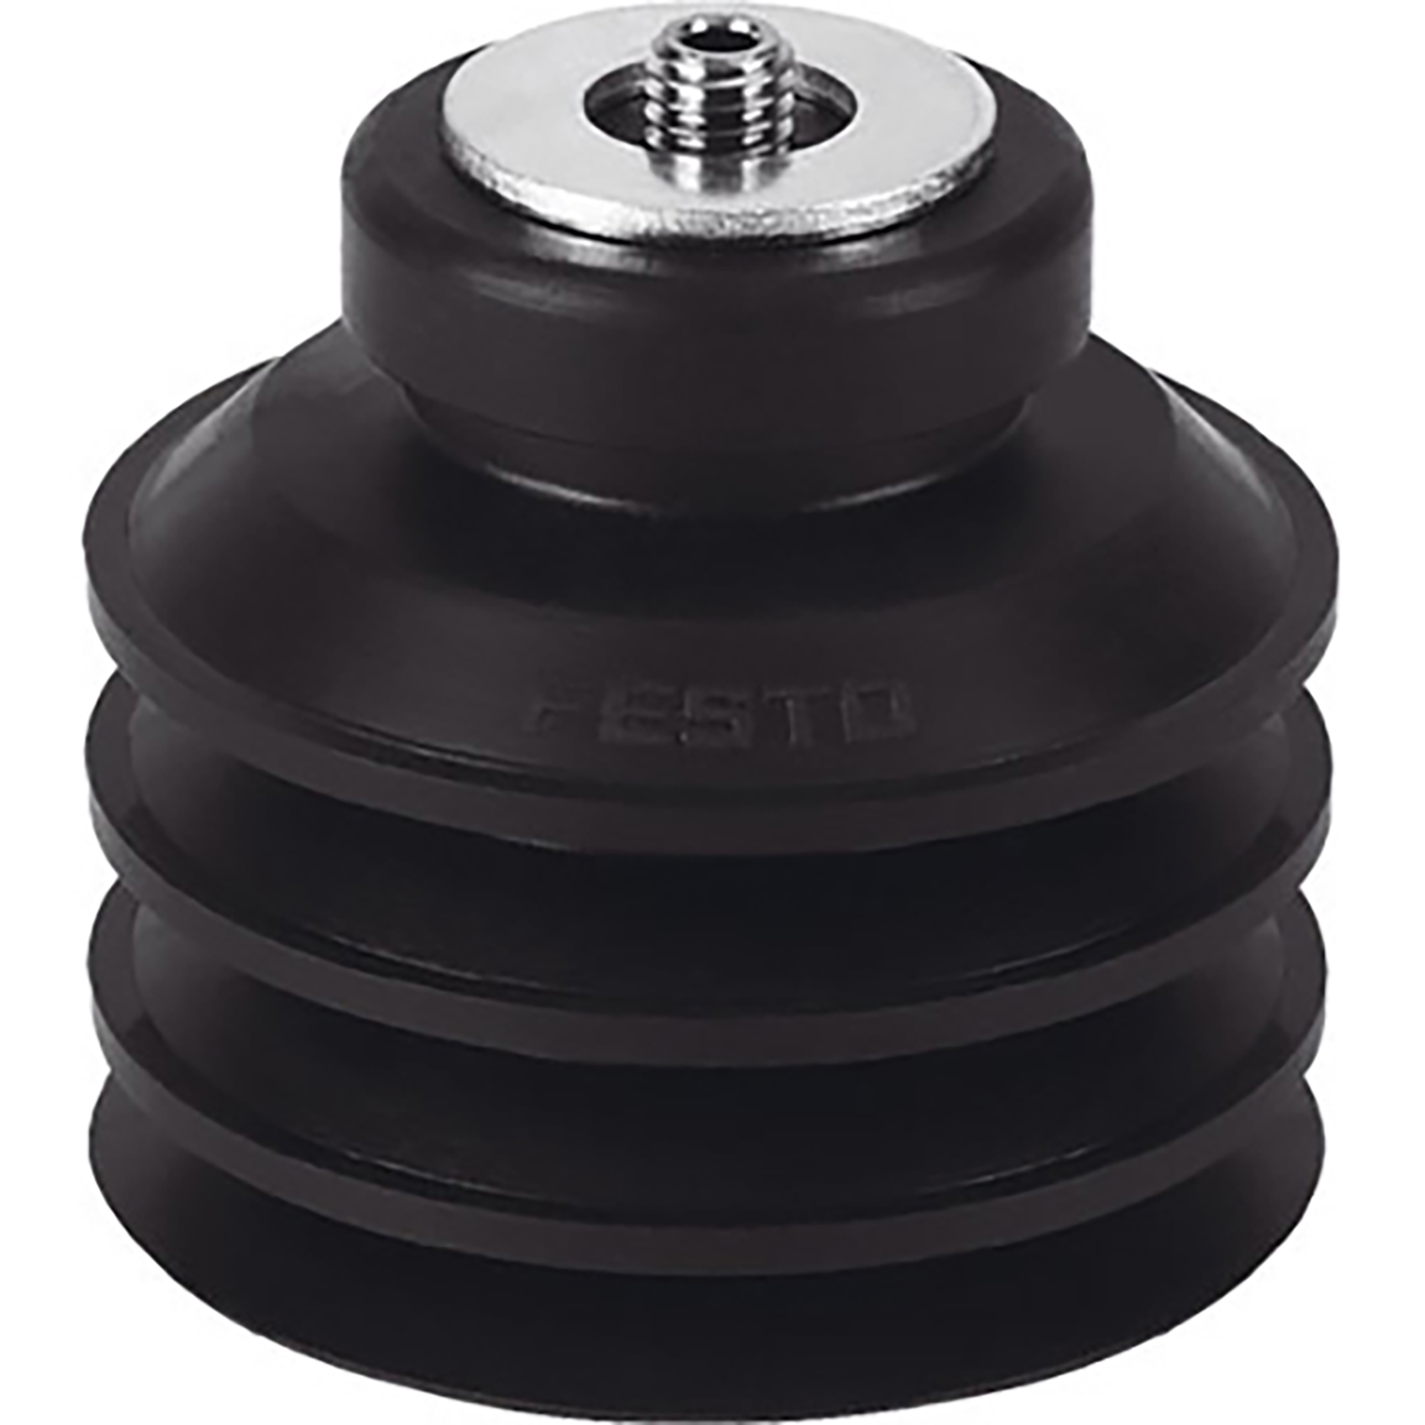 ESS-40-CN SUCTION CUP